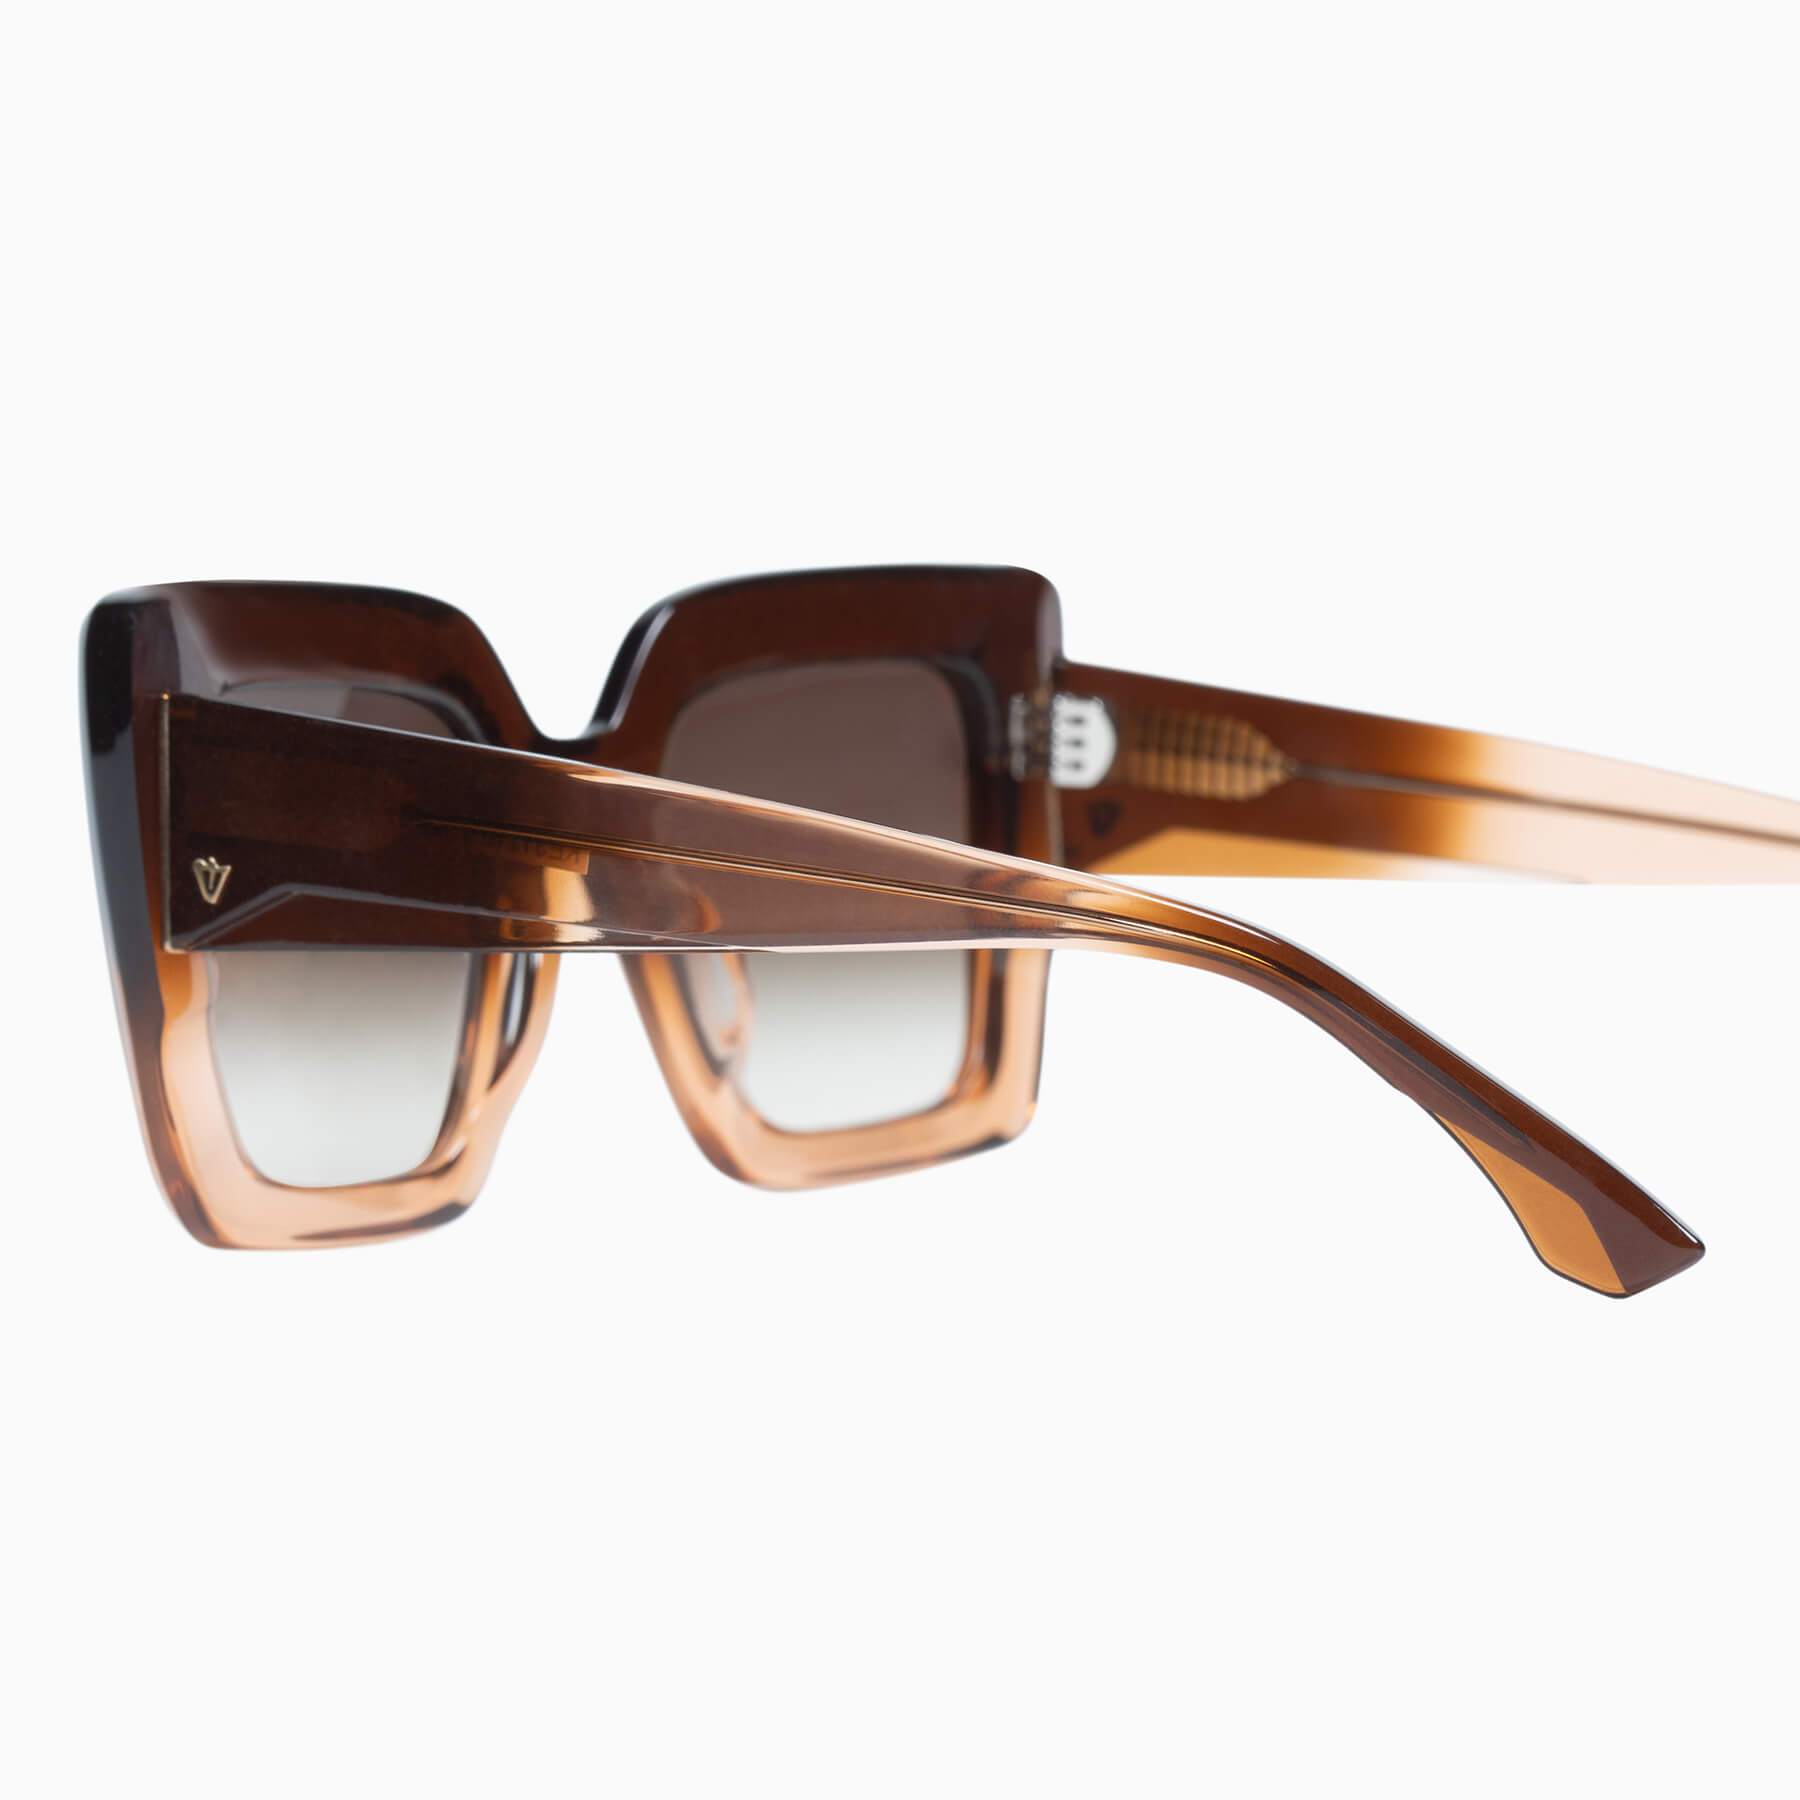 Polarized Amour / Cola Fade / Brown Gradient Lens